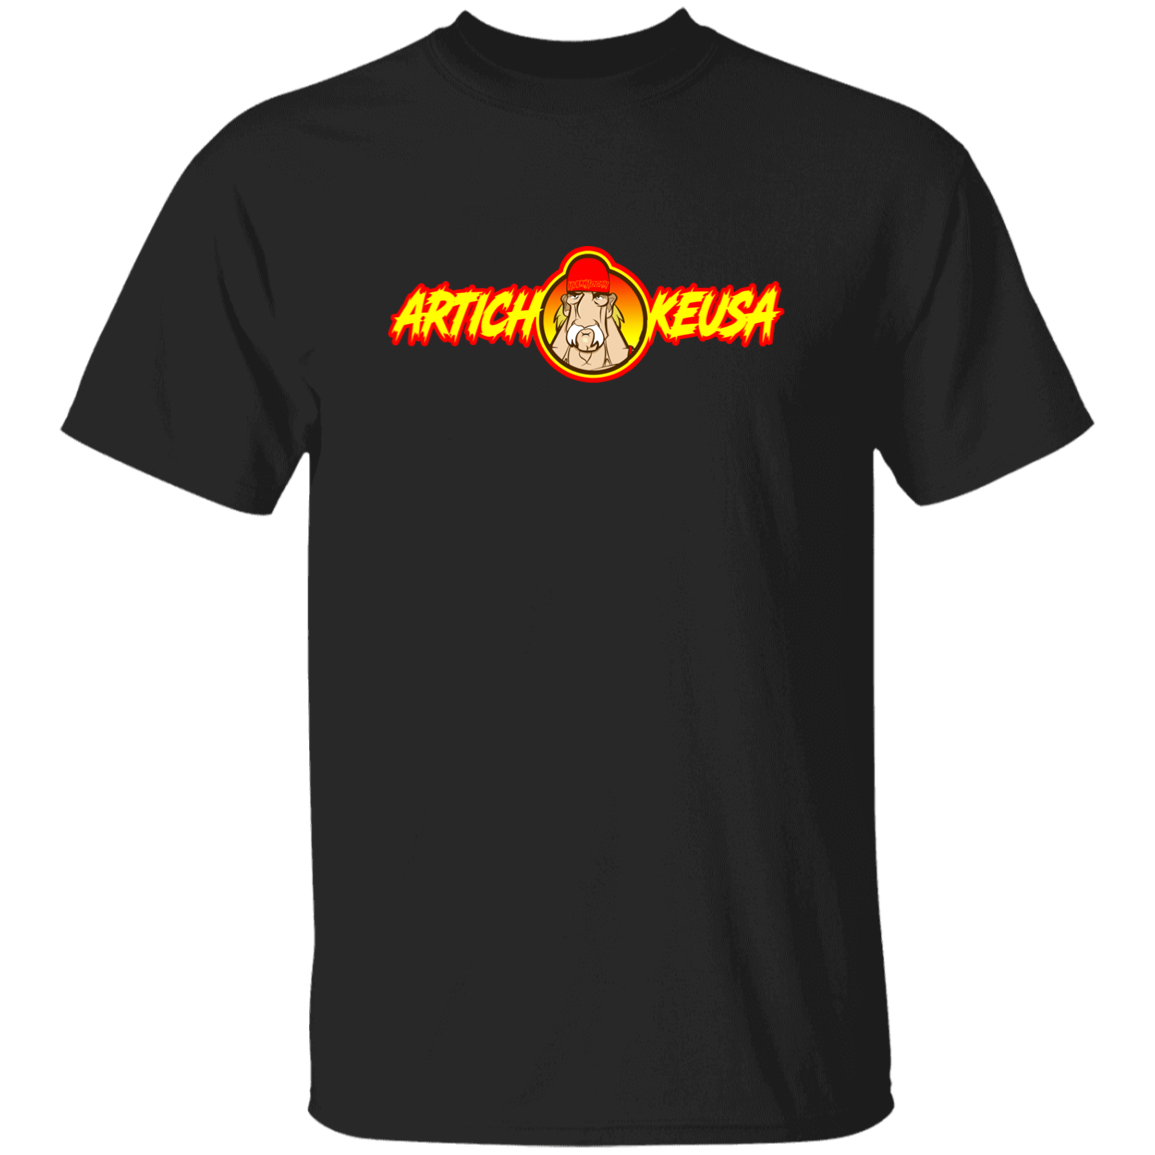 ArtichokeUSA Character and Font Design. Let’s Create Your Own Design Today. Fan Art. The Hulkster. Youth 5.3 oz 100% Cotton T-Shirt